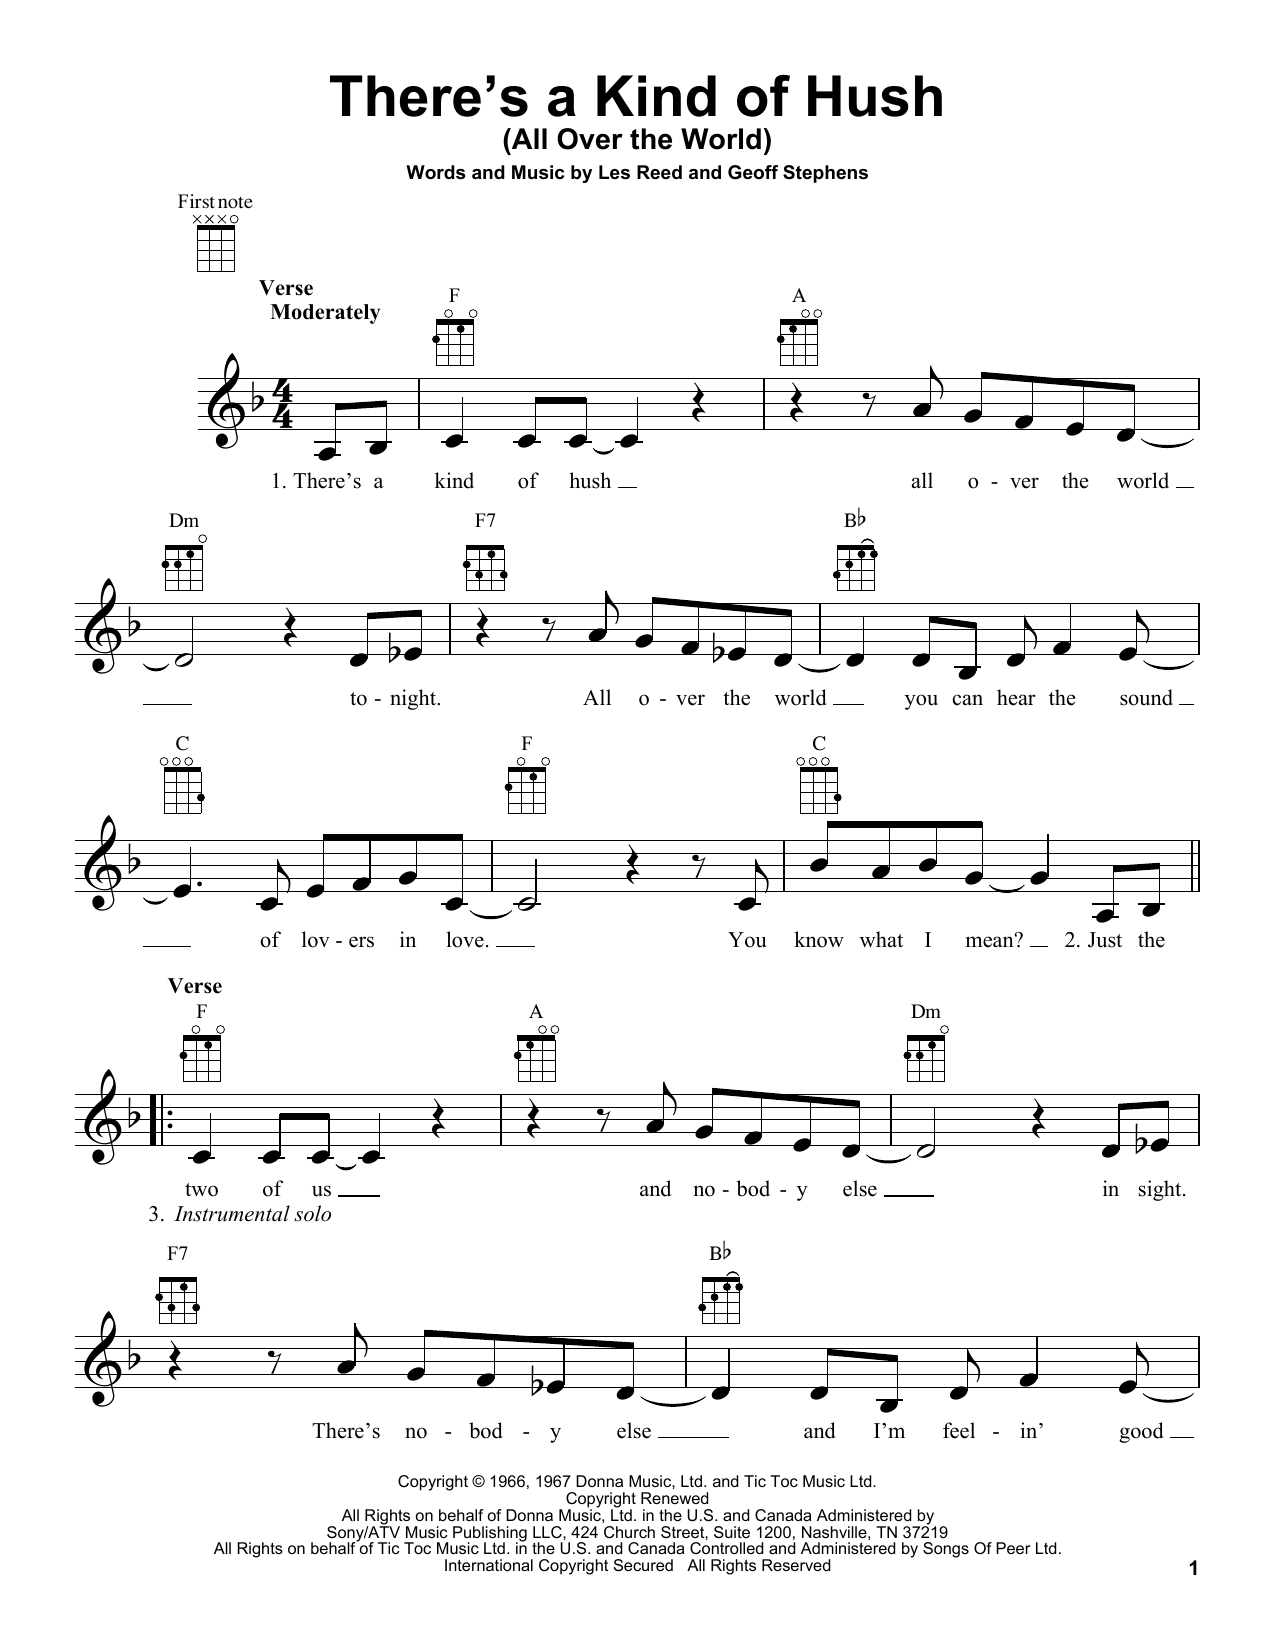 Carpenters There's A Kind Of Hush (All Over The World) sheet music notes and chords. Download Printable PDF.